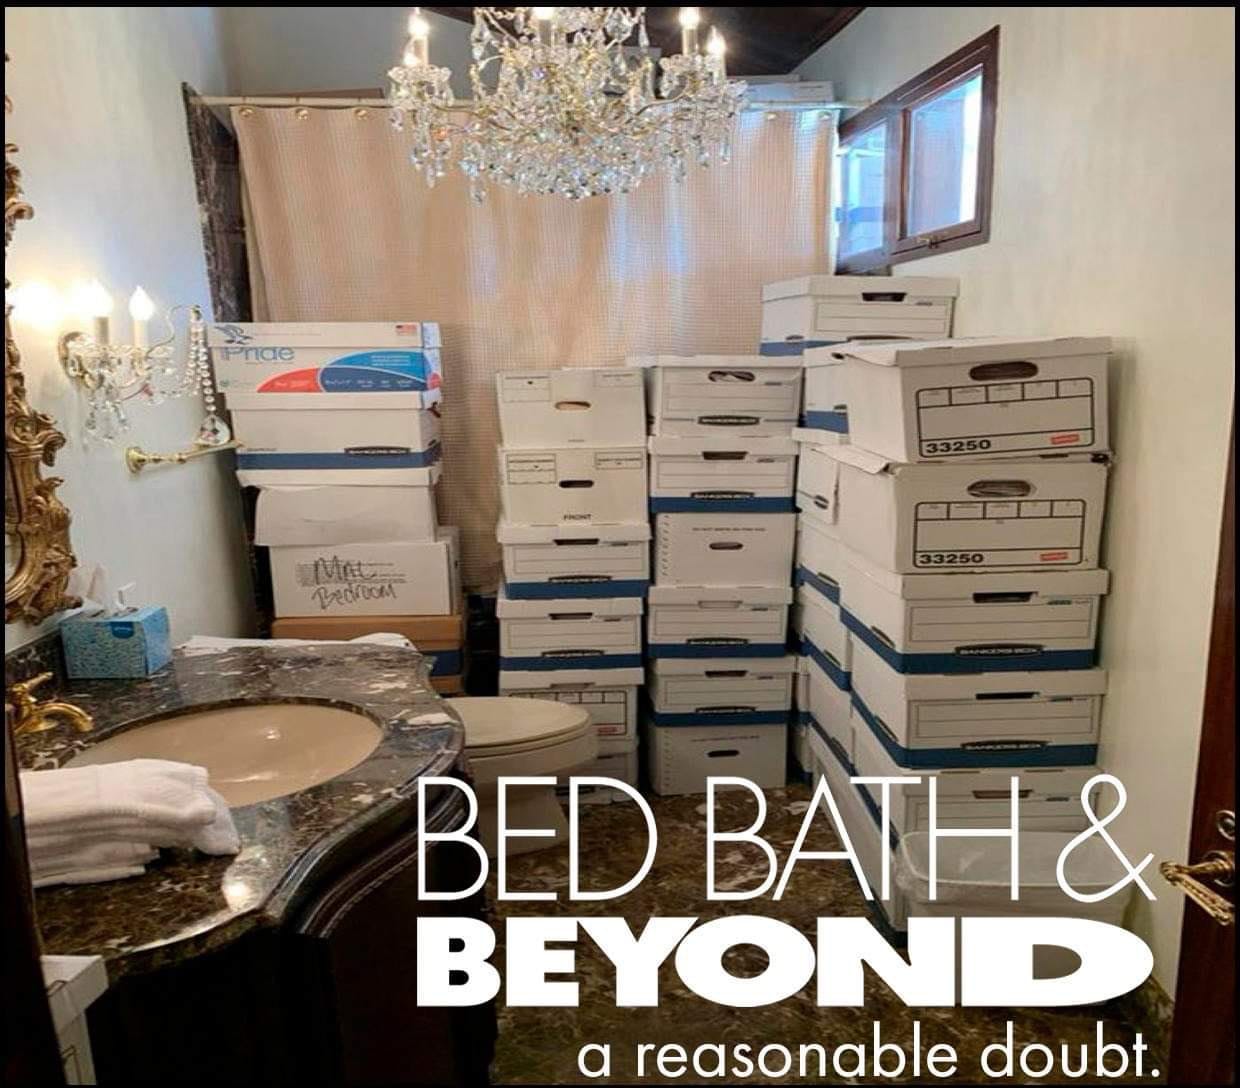 trump bed bath and beyond a reasonable doubt.jpg